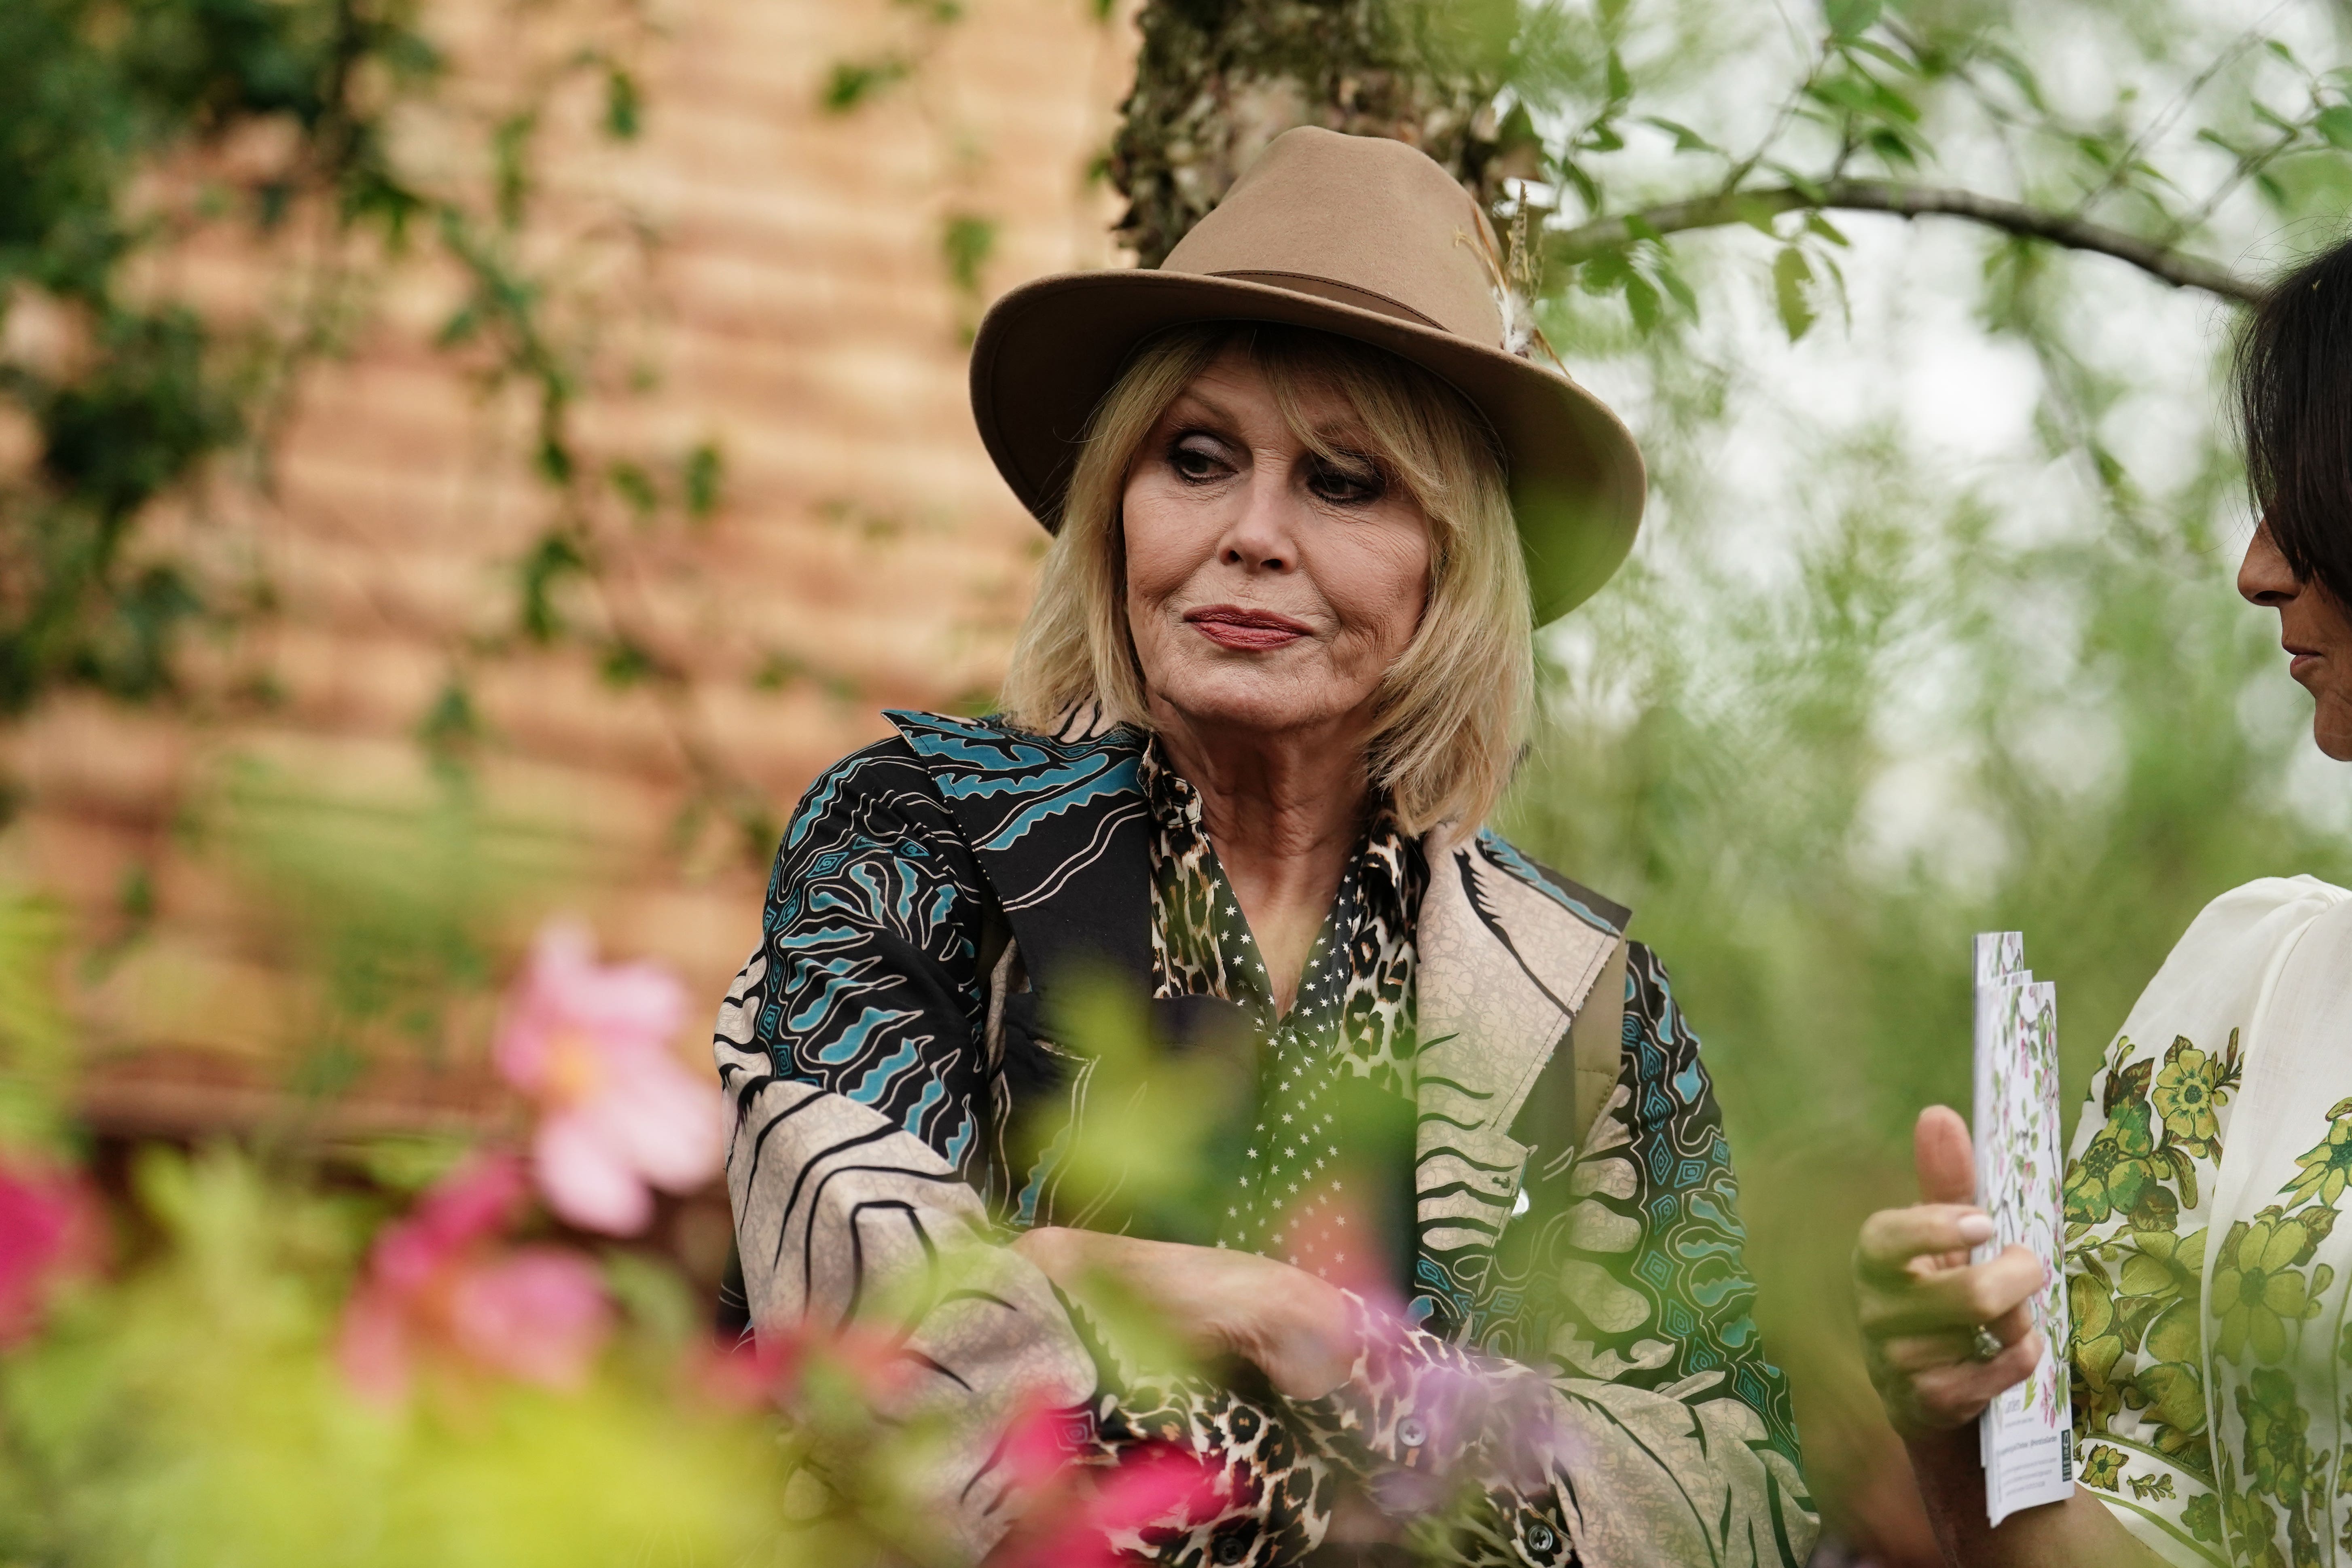 Joanna Lumley has always been interested in fashion